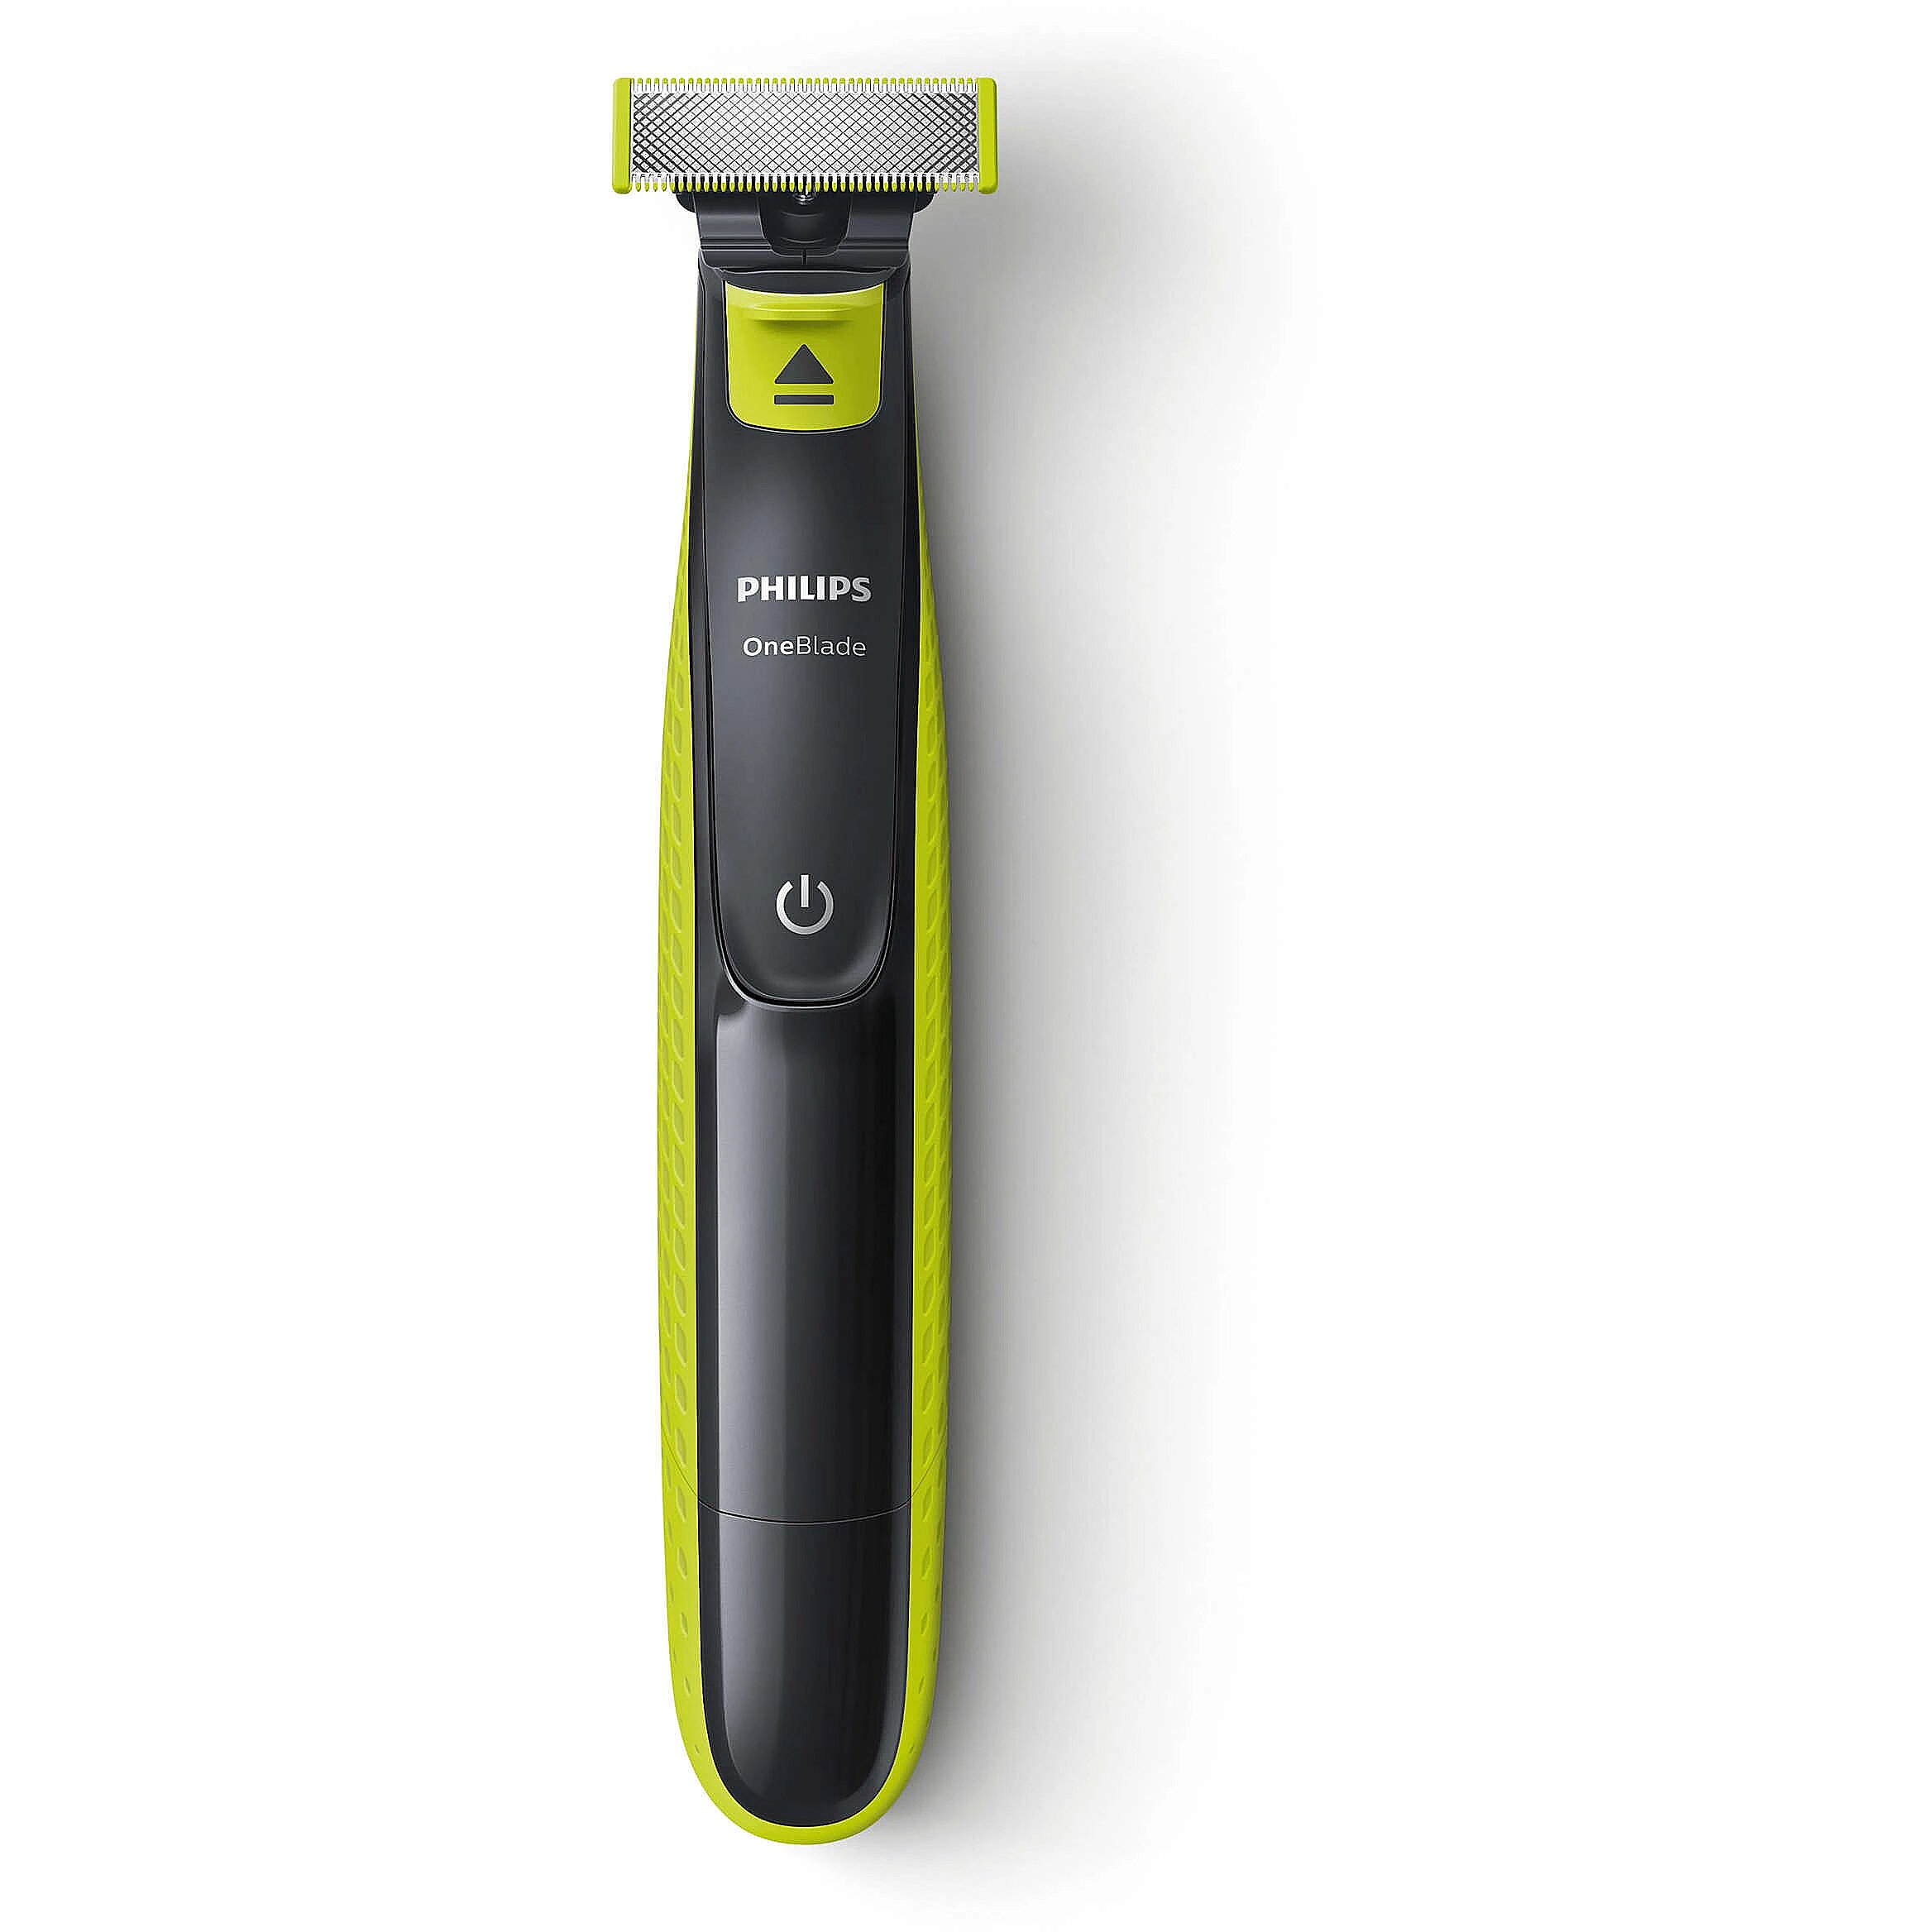 Mathis chat Sick person Philips Shaver OneBlade QP2620/20 Cordless, Charging time 8 h, Operating  time 45 min, Wet use, NiMH, Number of shaver heads/blades 1, Green/Grey ( QP2620/20)